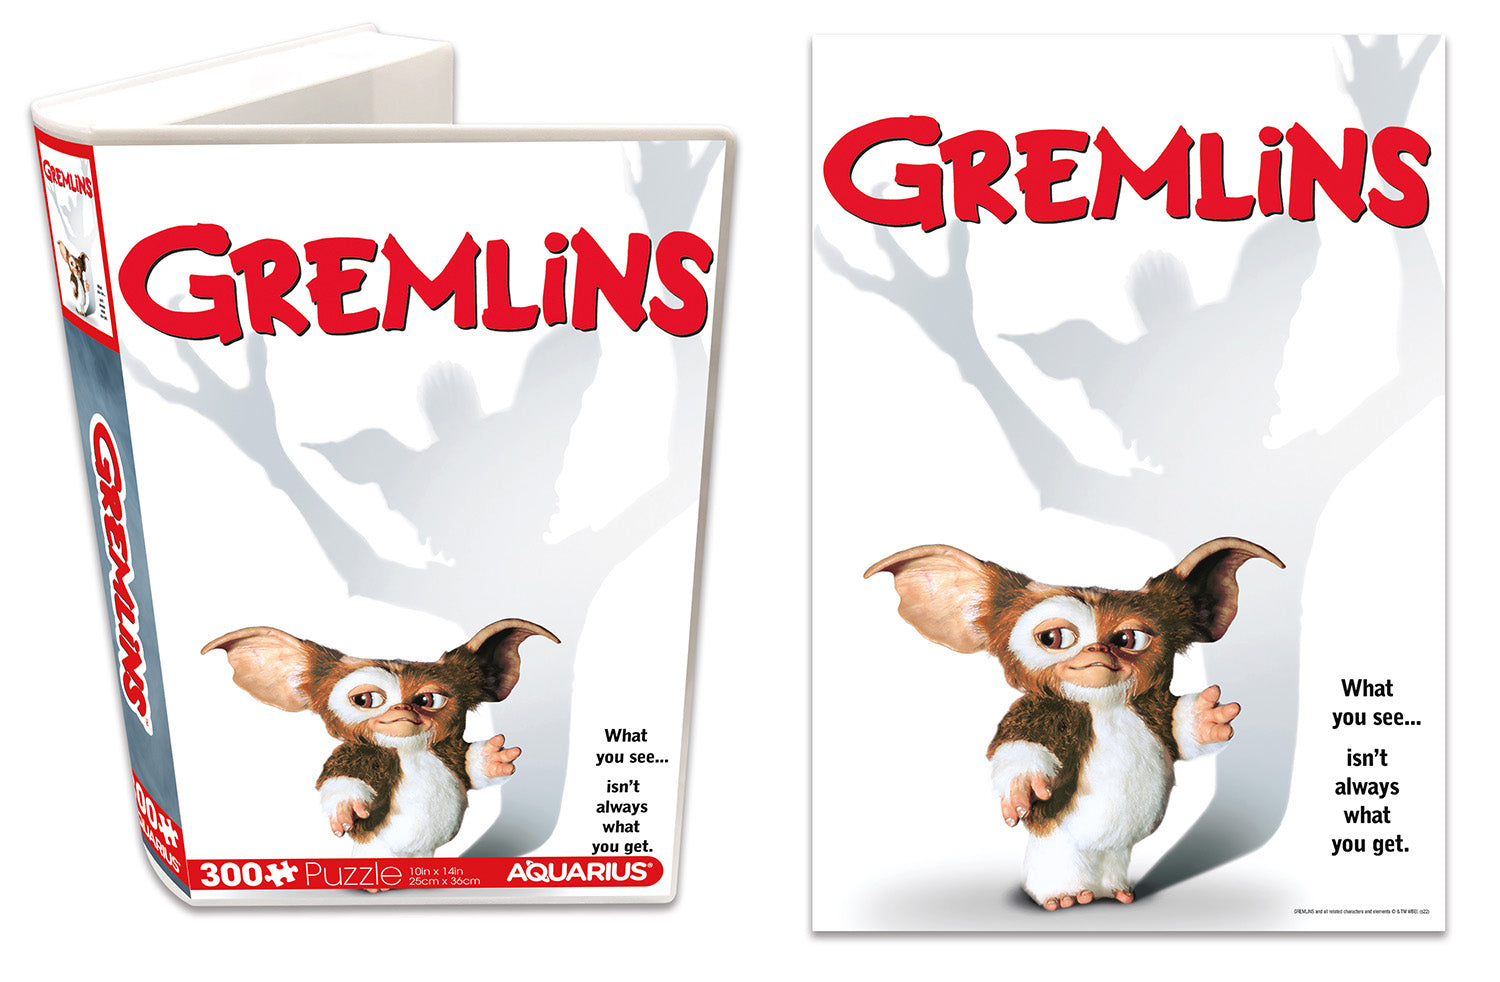 300-piece GREMLINS VHS-style jigsaw puzzle box featuring artwork of a Gremlin character